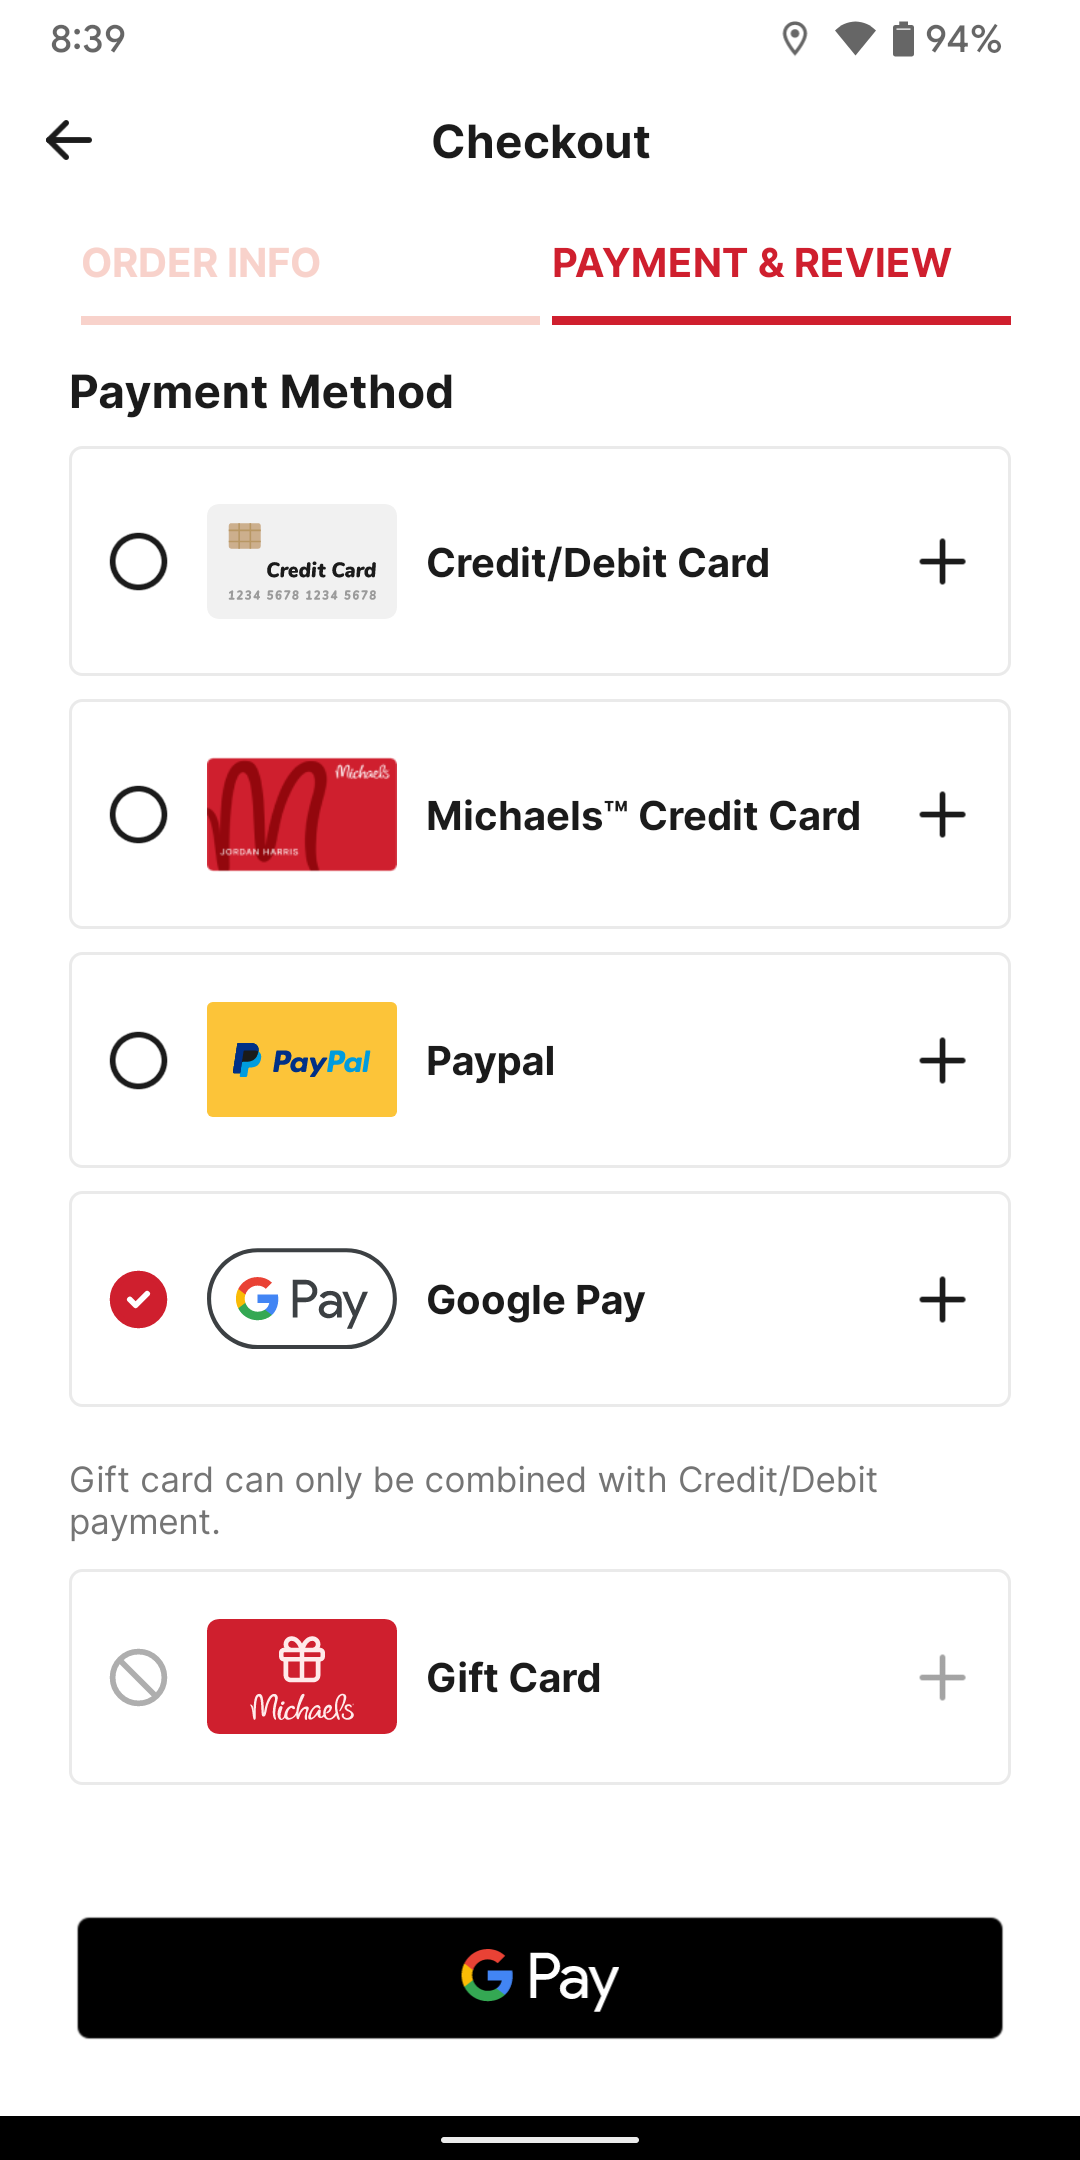 Michaels accepts Google Pay in its Android app.